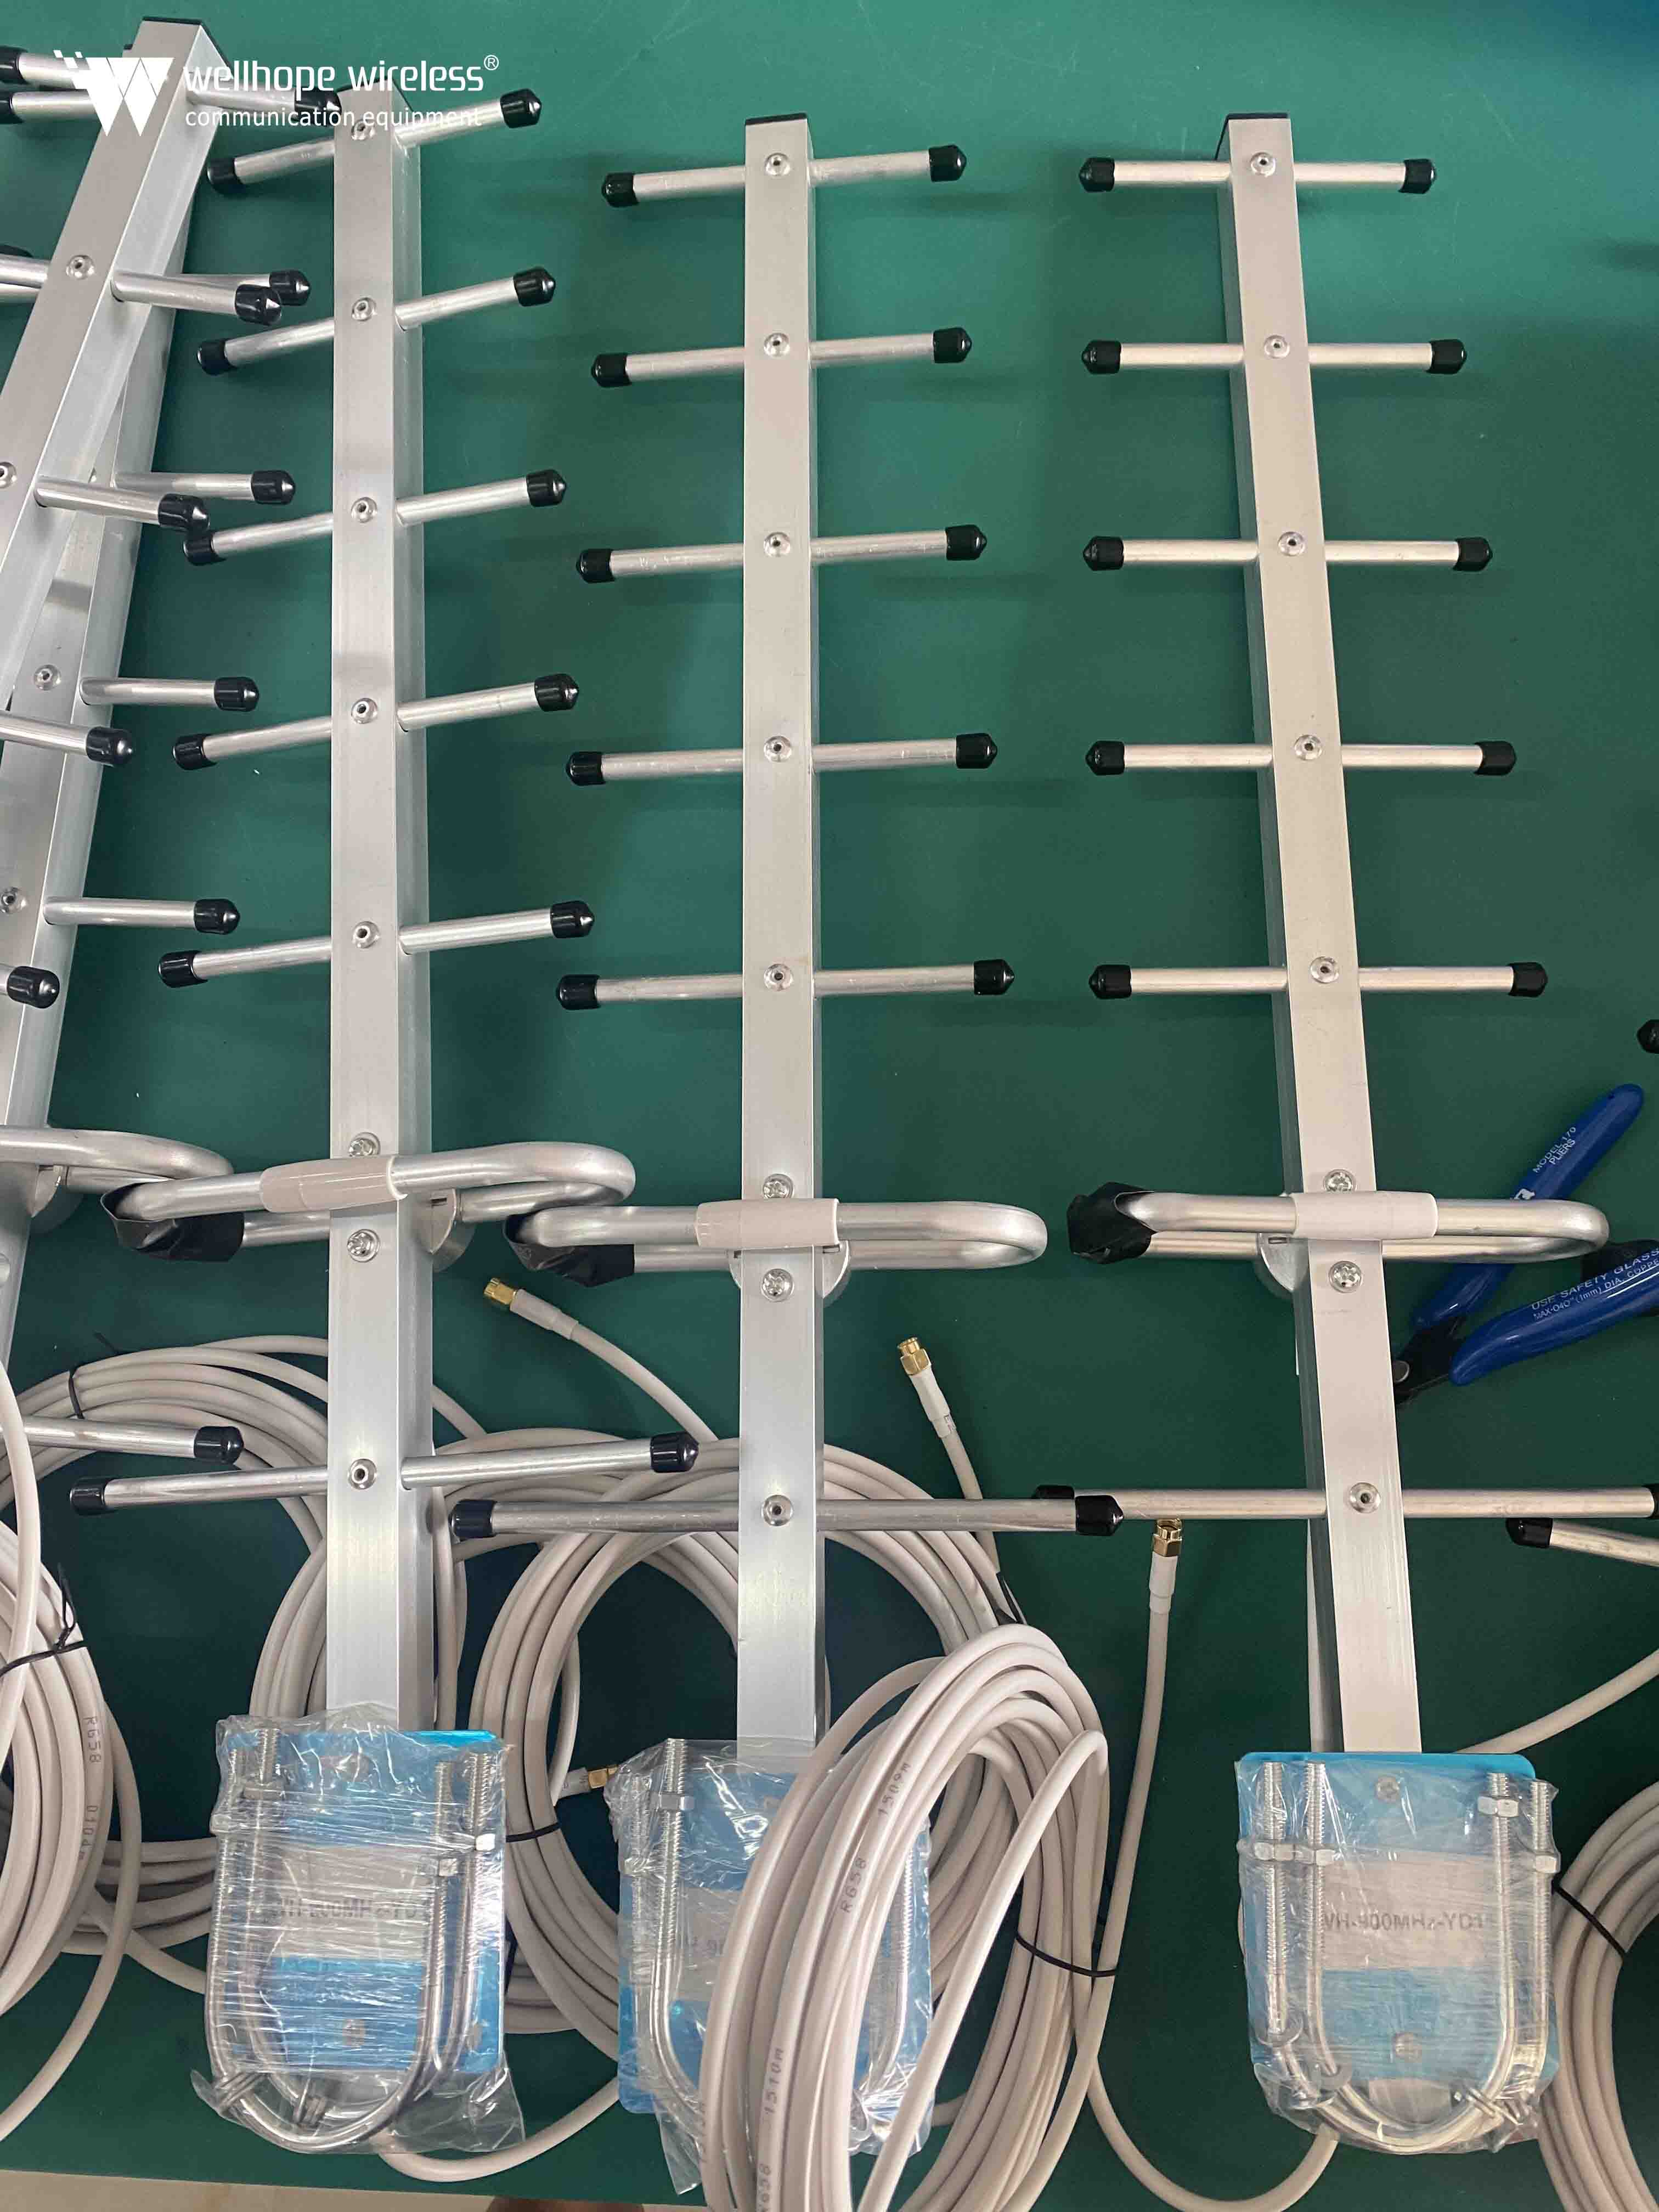 2021-10-4 900MHz 11dBi 7element antenna WH-900MHz-YD11 500pcs on producing